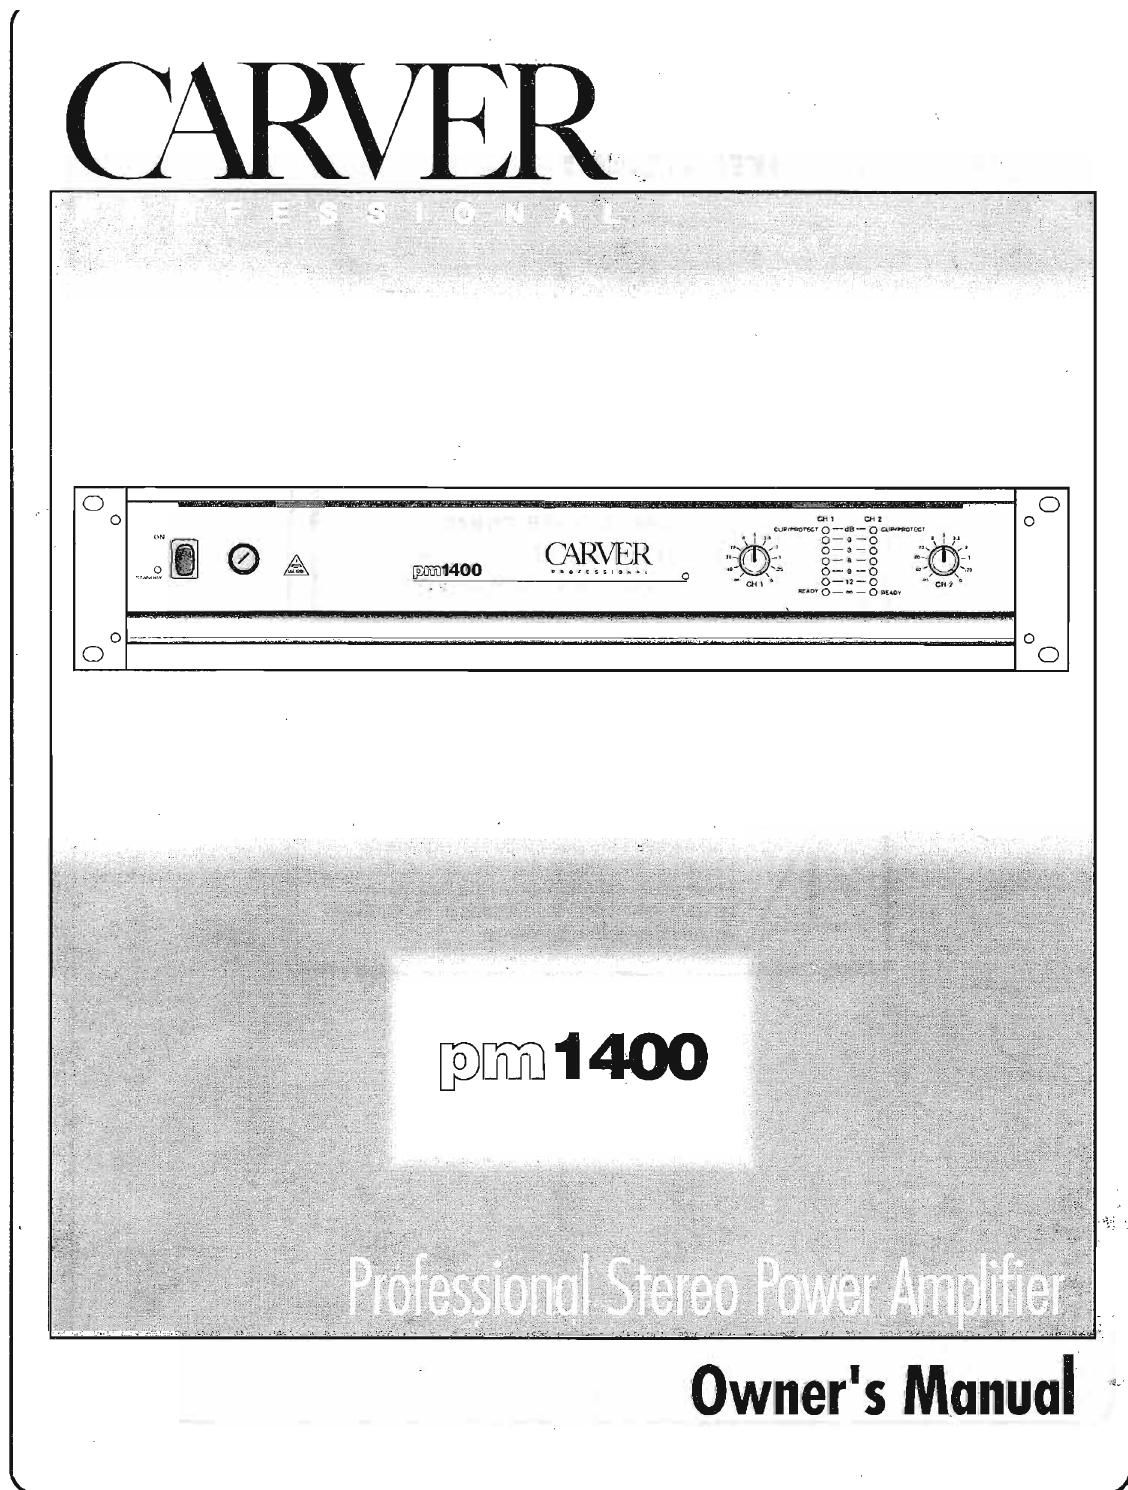 Carver PM 1400 Owners Manual